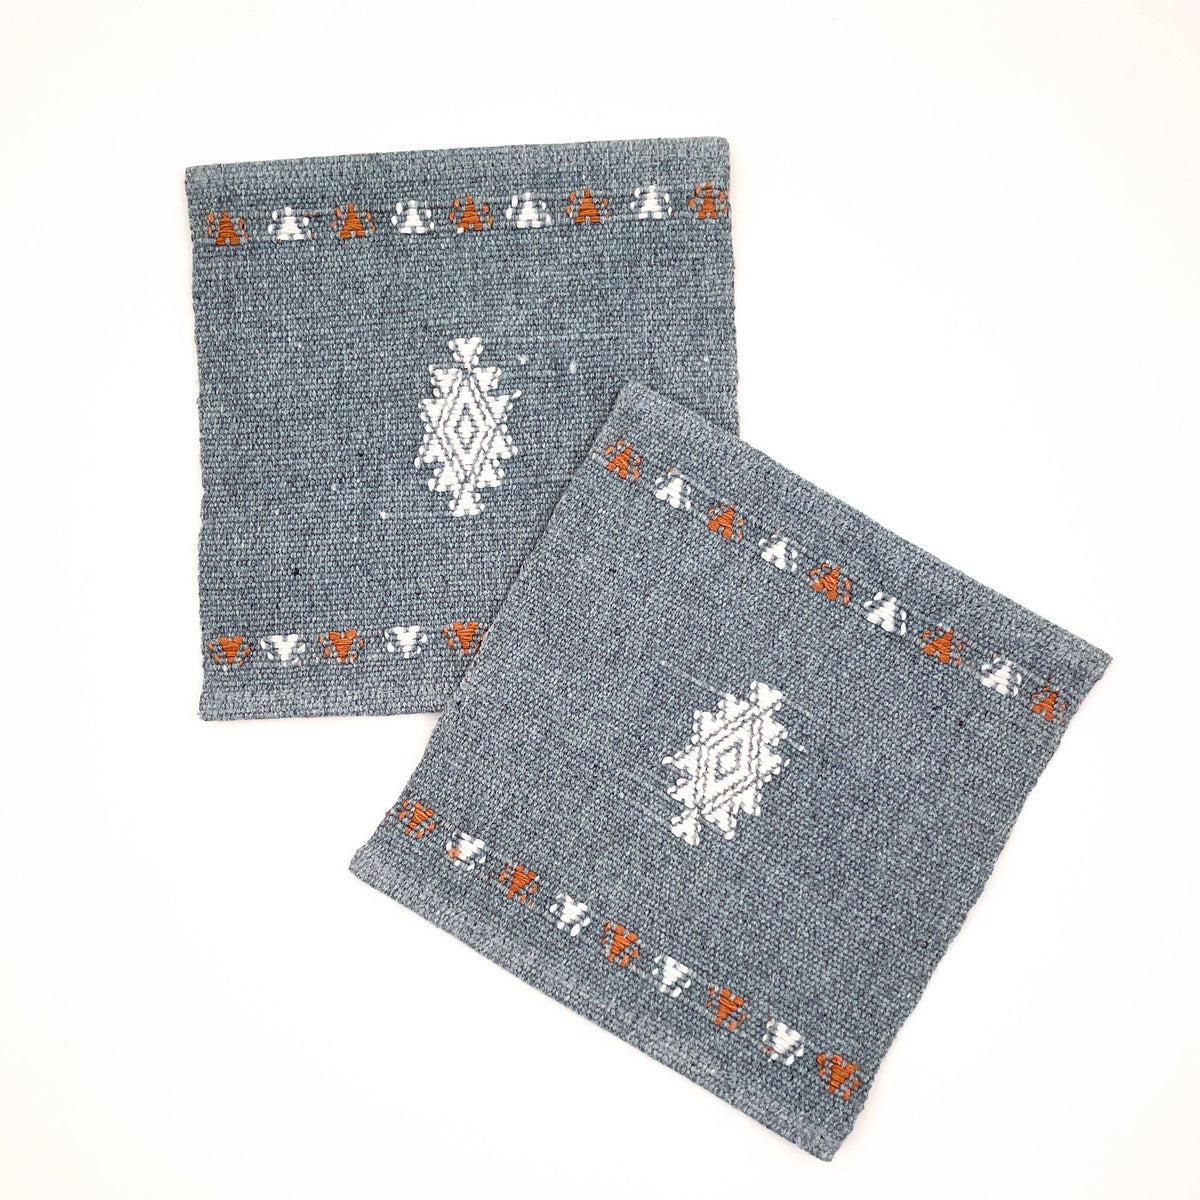 Coaster with brocade Maya star and detail on recycled denim background